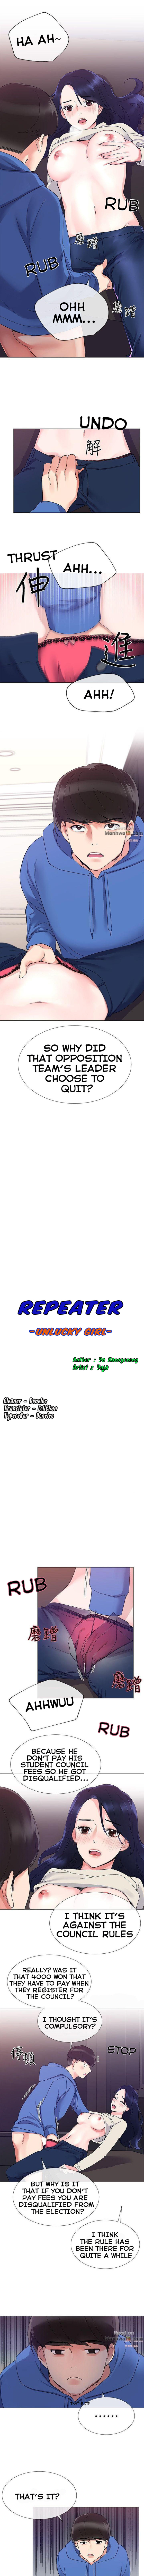 Repeater - Chapter 11 Page 1